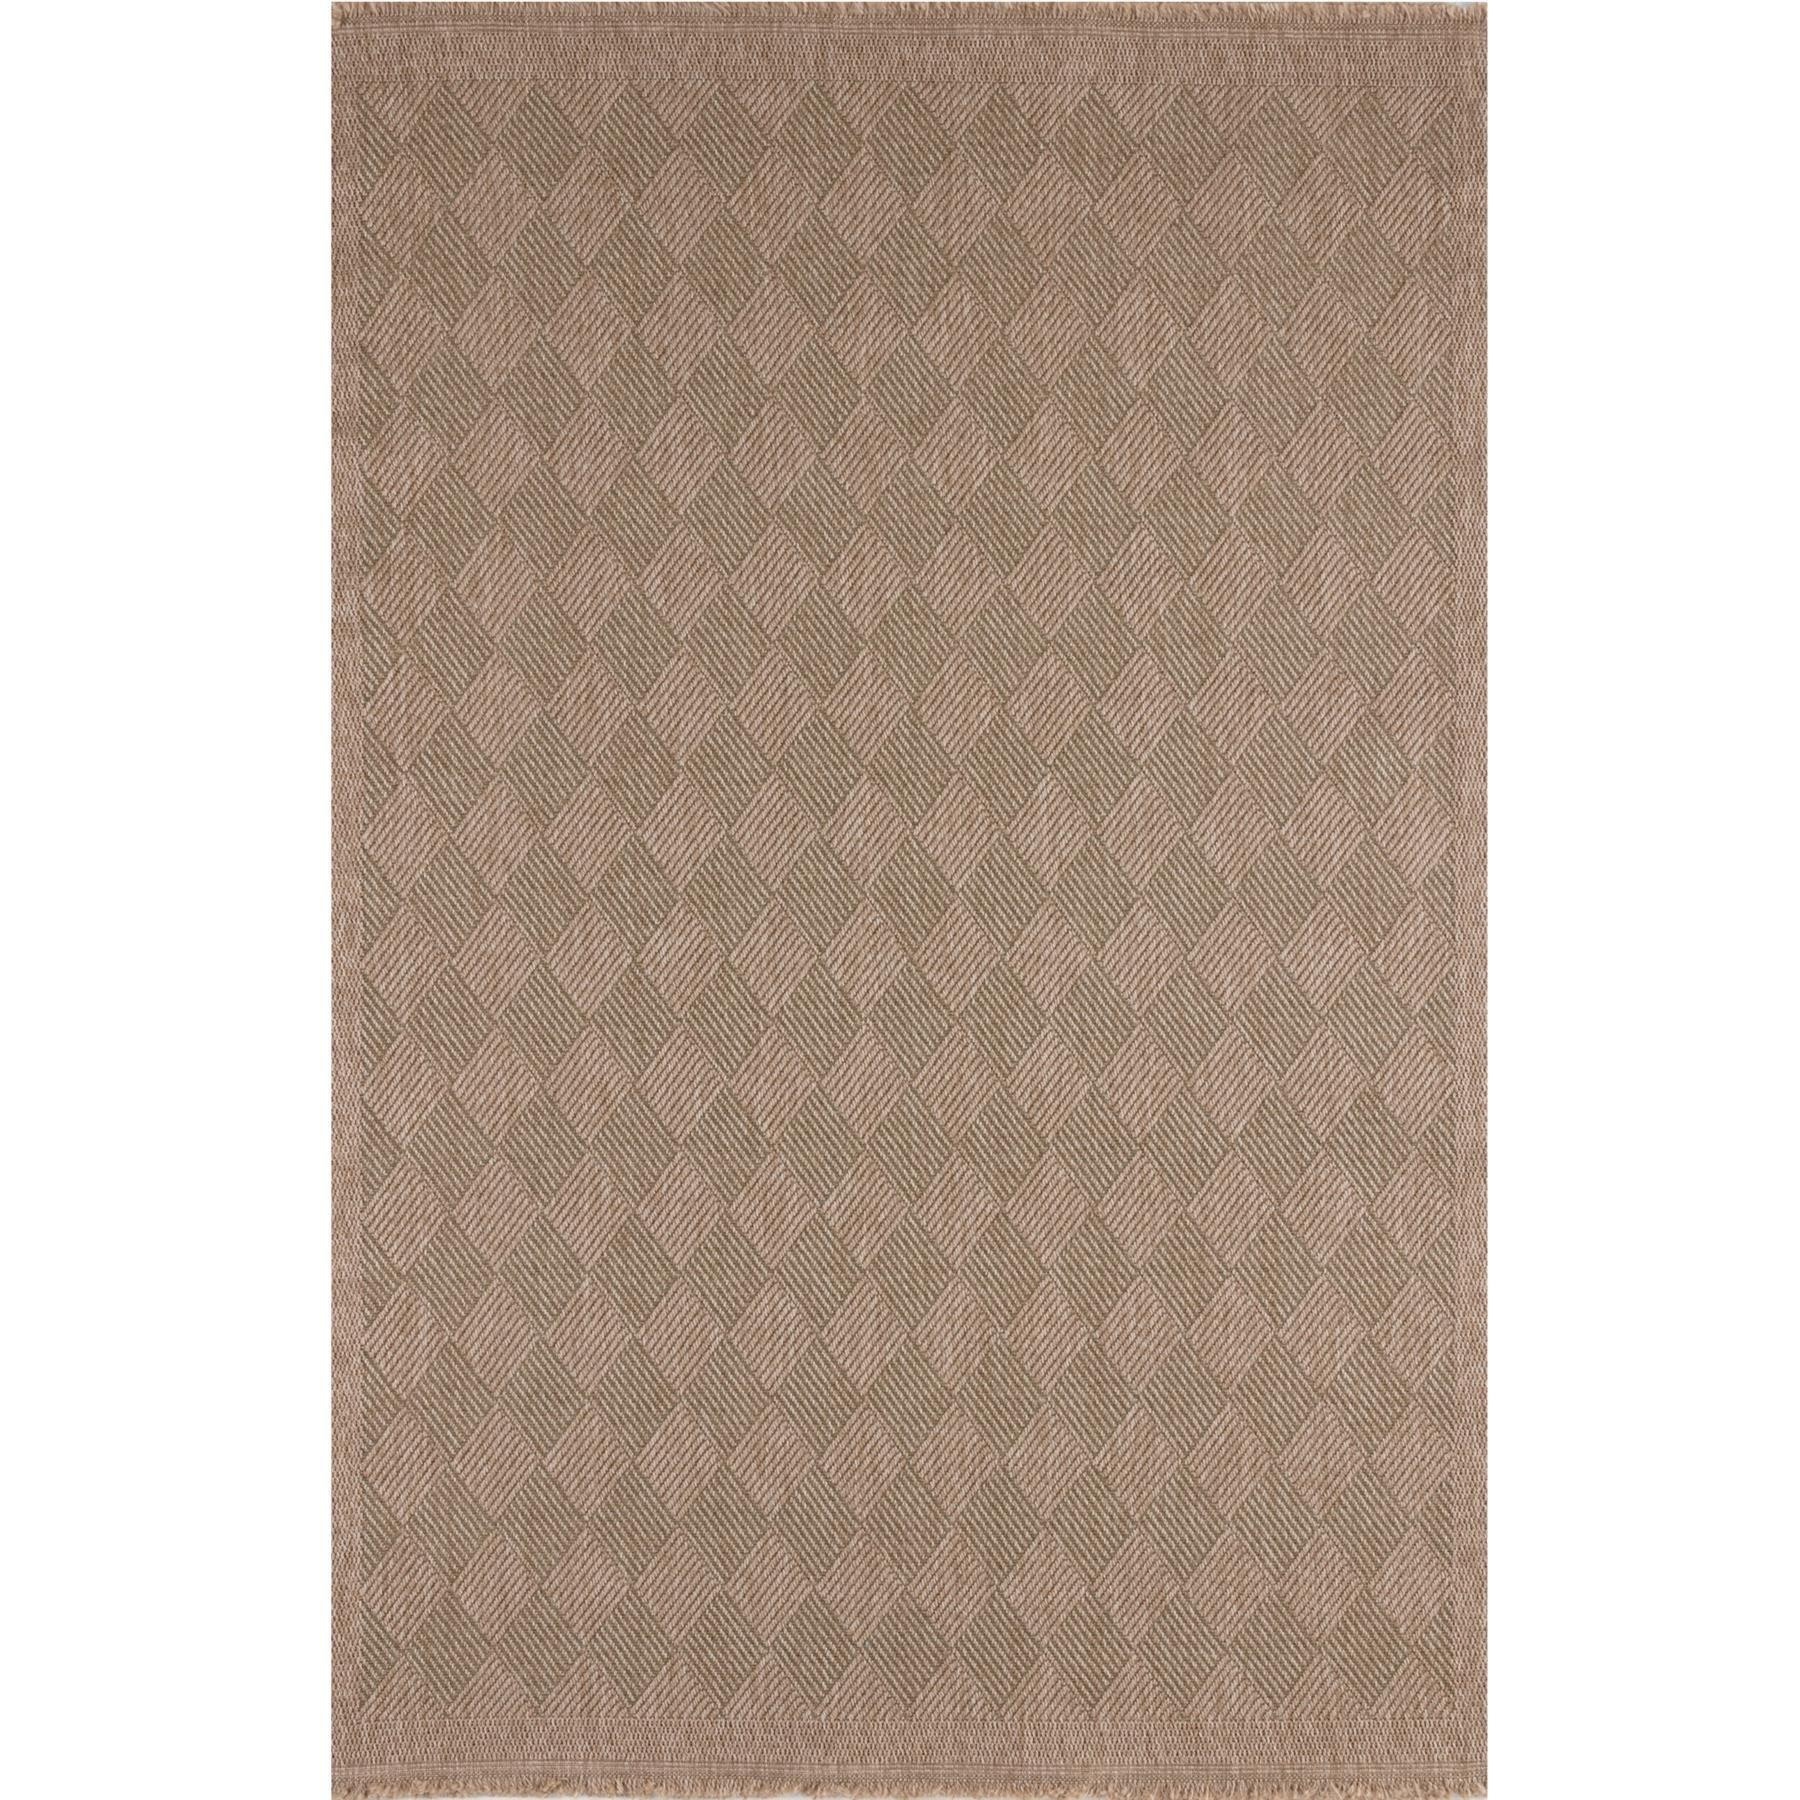 Nature Collection Outdoor Rug in Green - 5300G - image 1